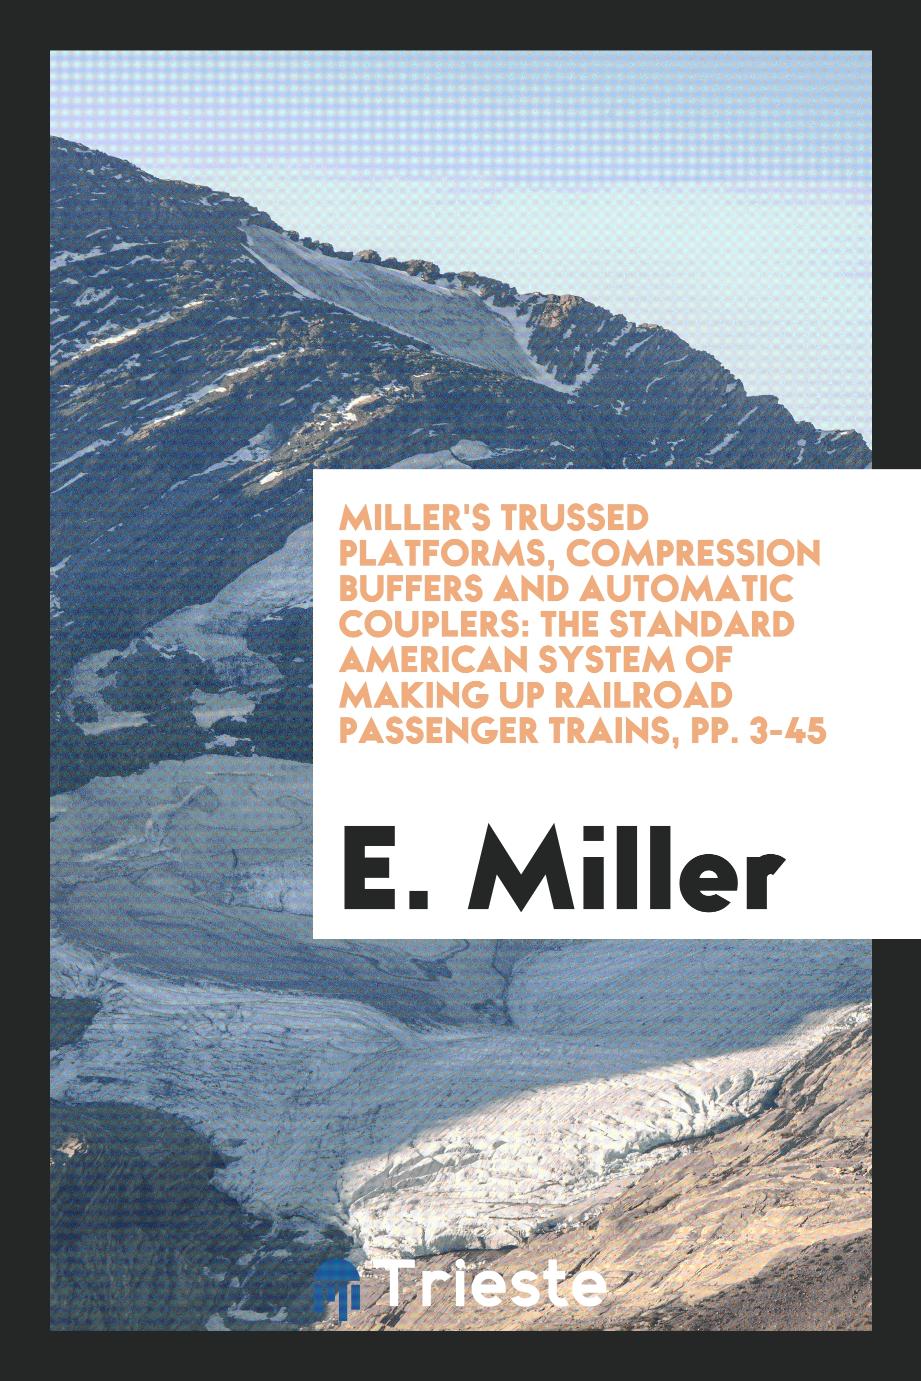 Miller's Trussed Platforms, Compression Buffers and Automatic Couplers: The Standard American system of making up railroad passenger trains, pp. 3-45